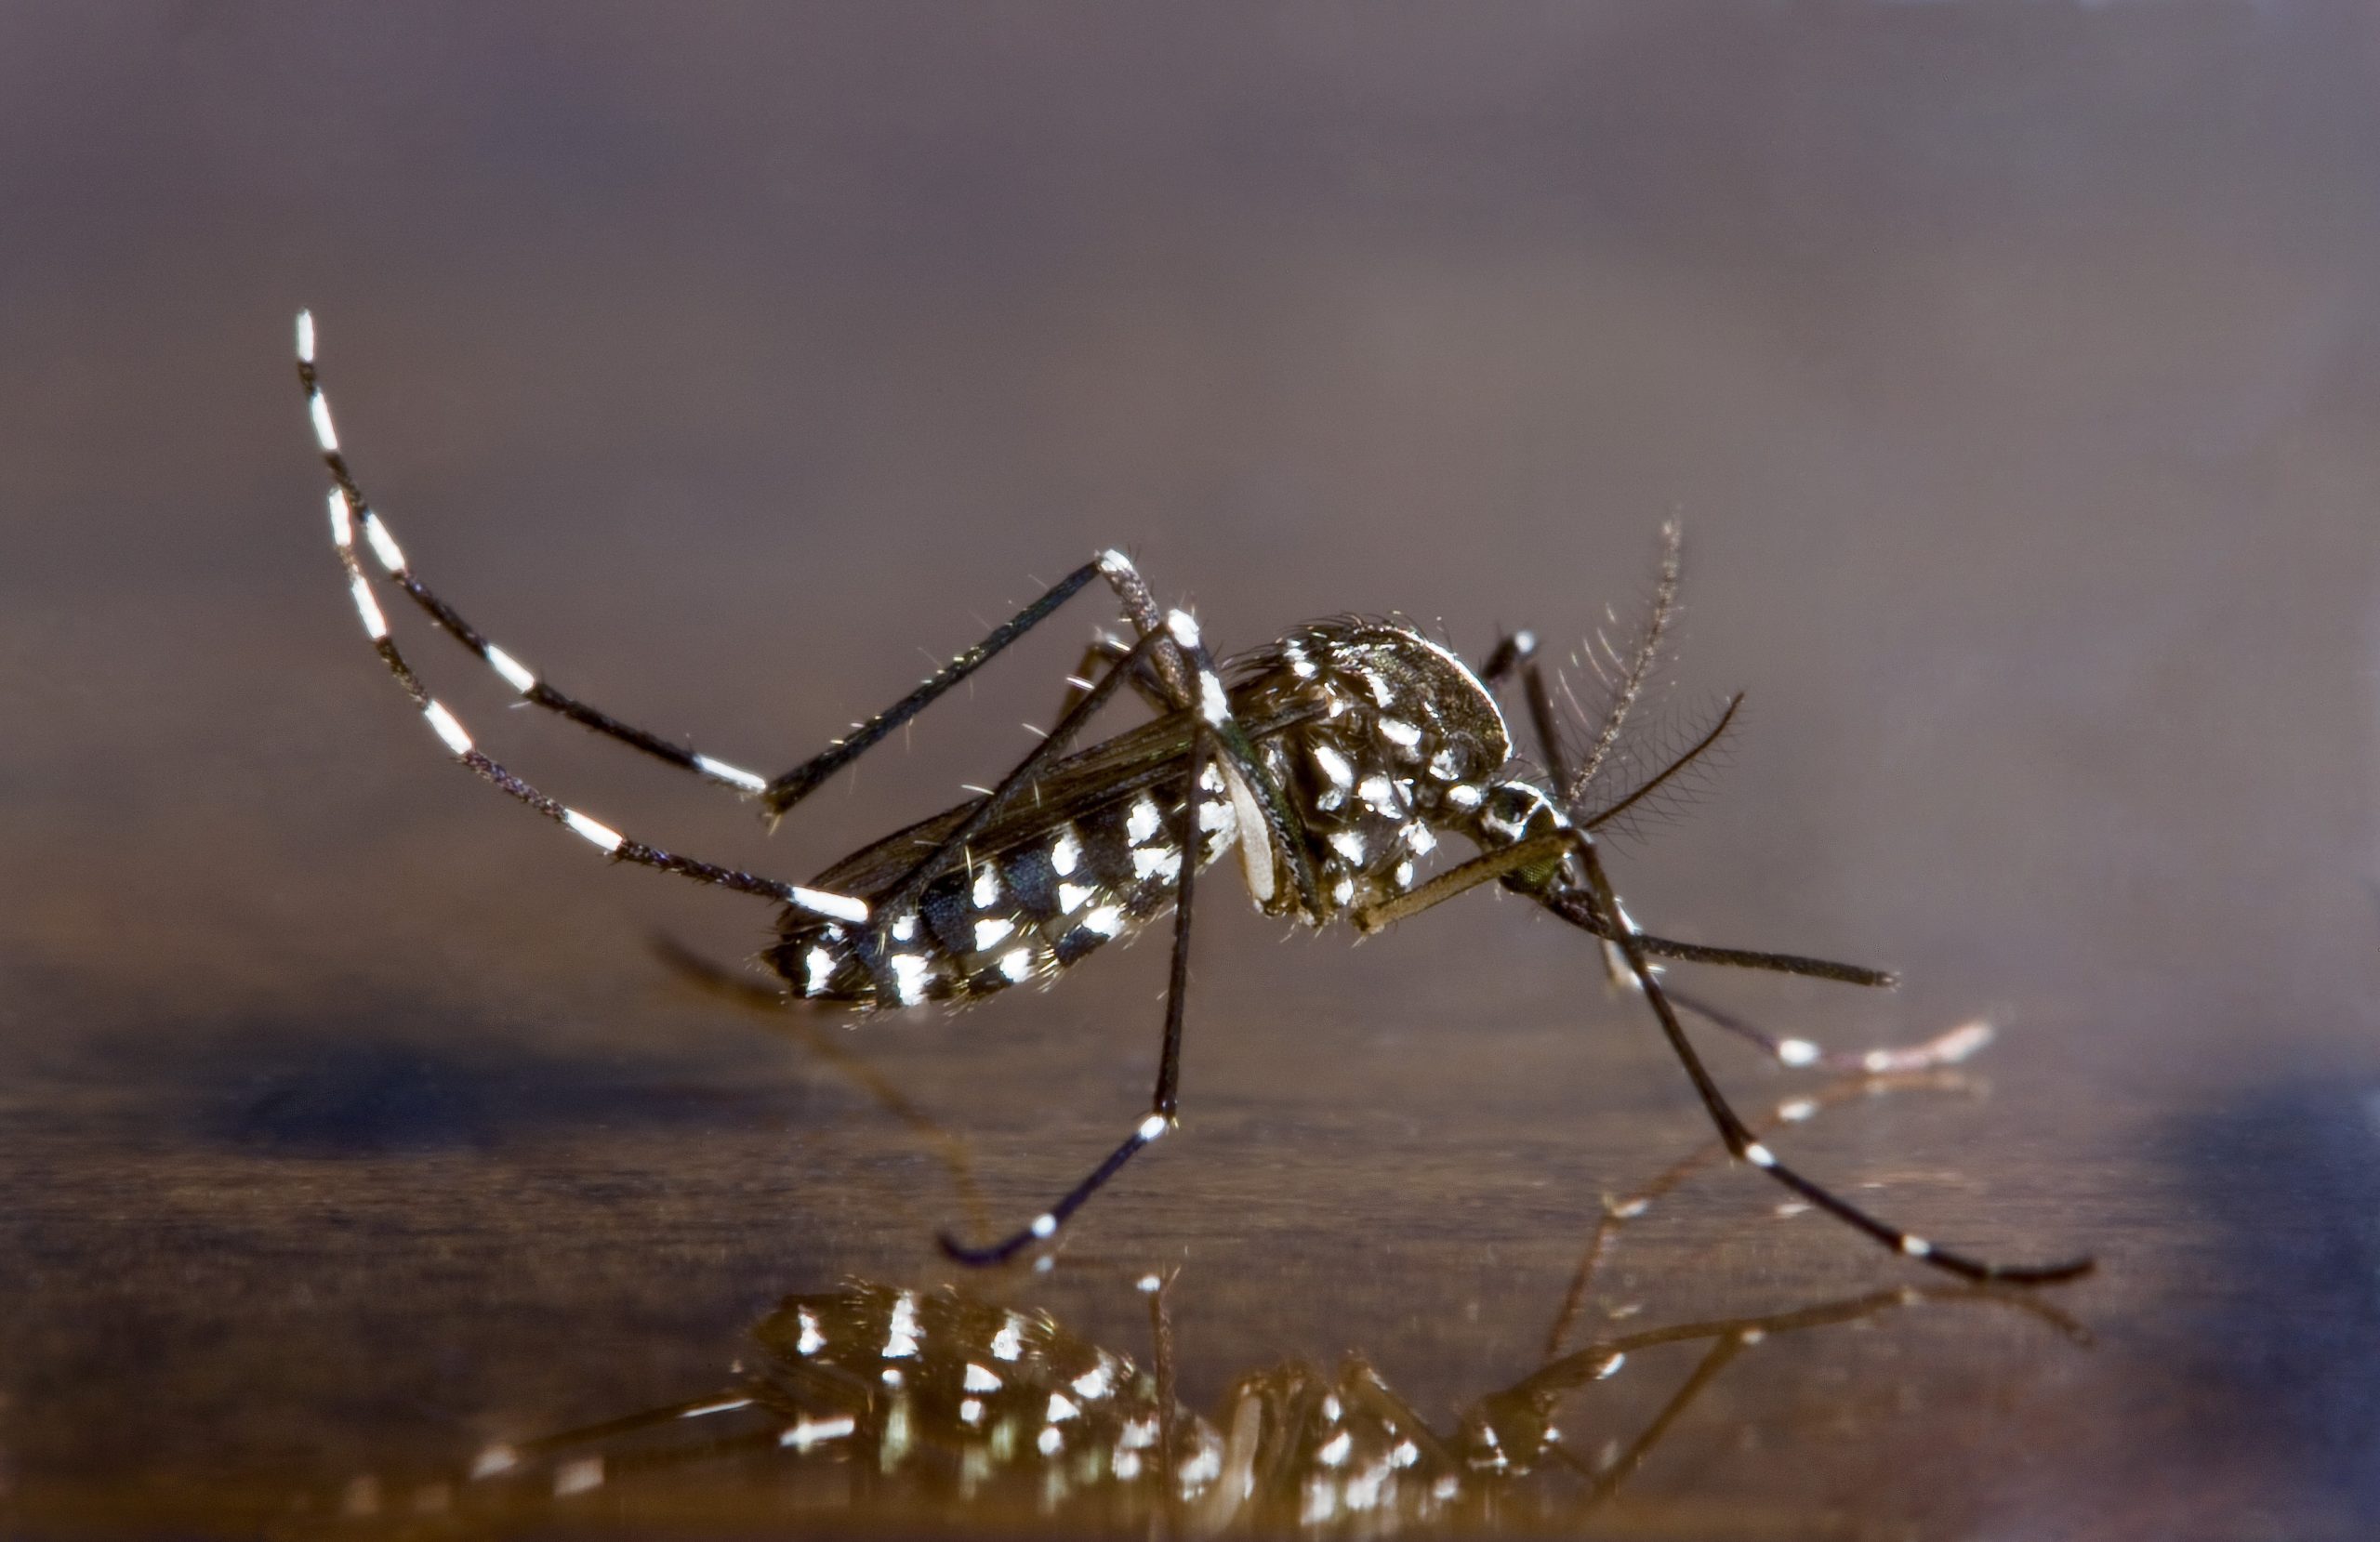 Mosquito Control – What Should We Do?